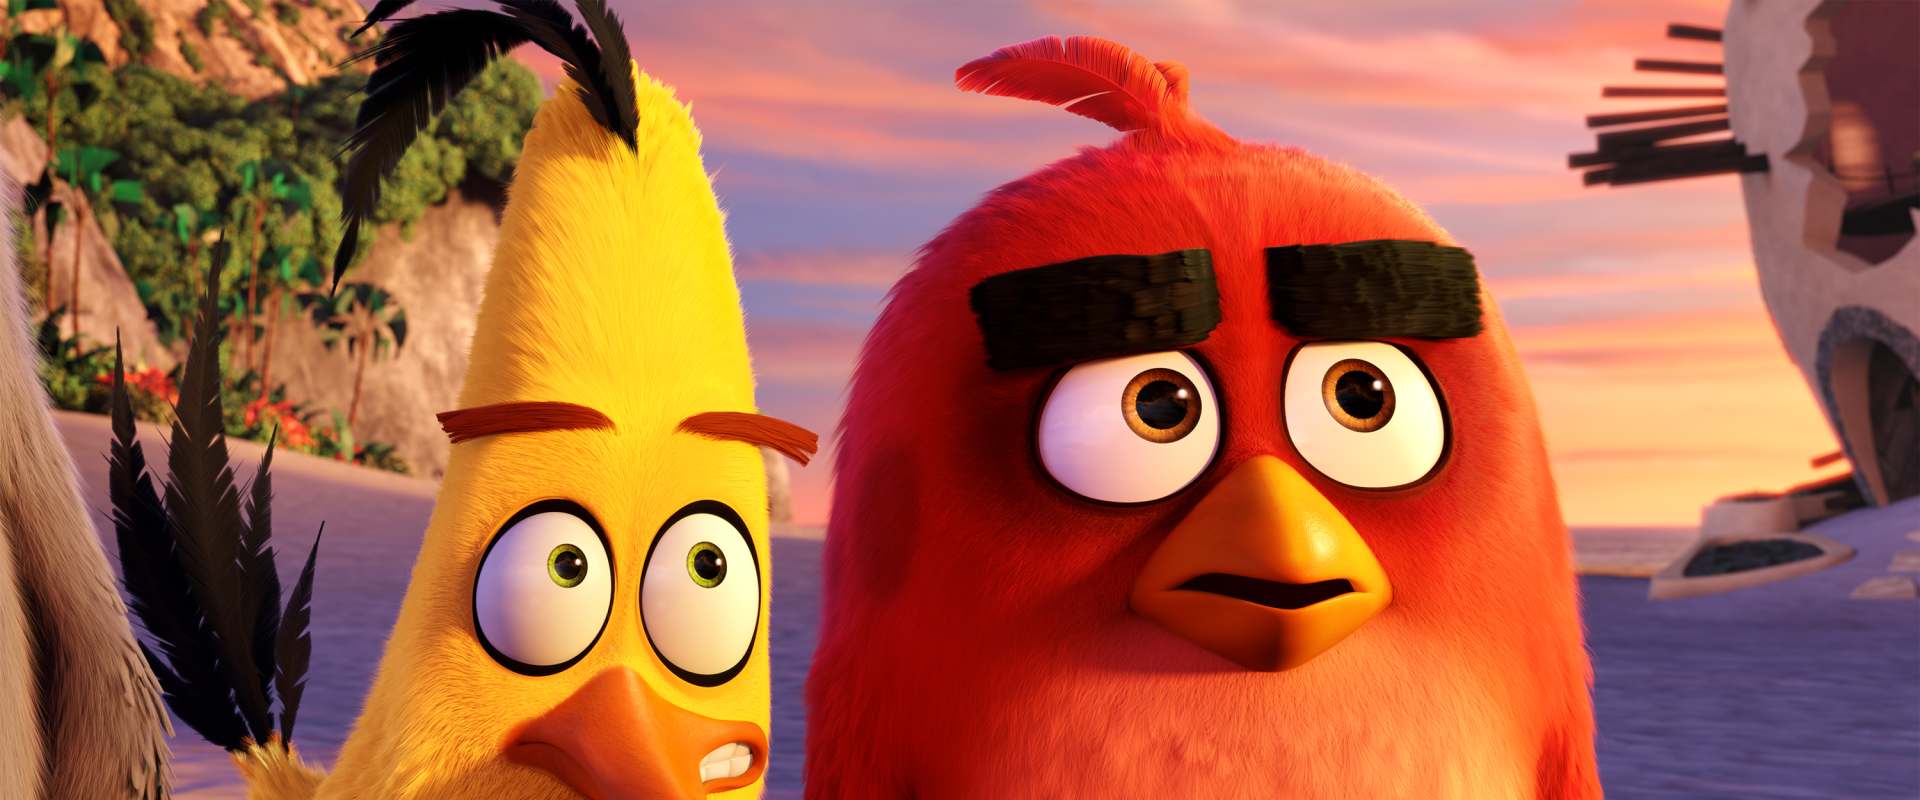 The Angry Birds Movie background 2